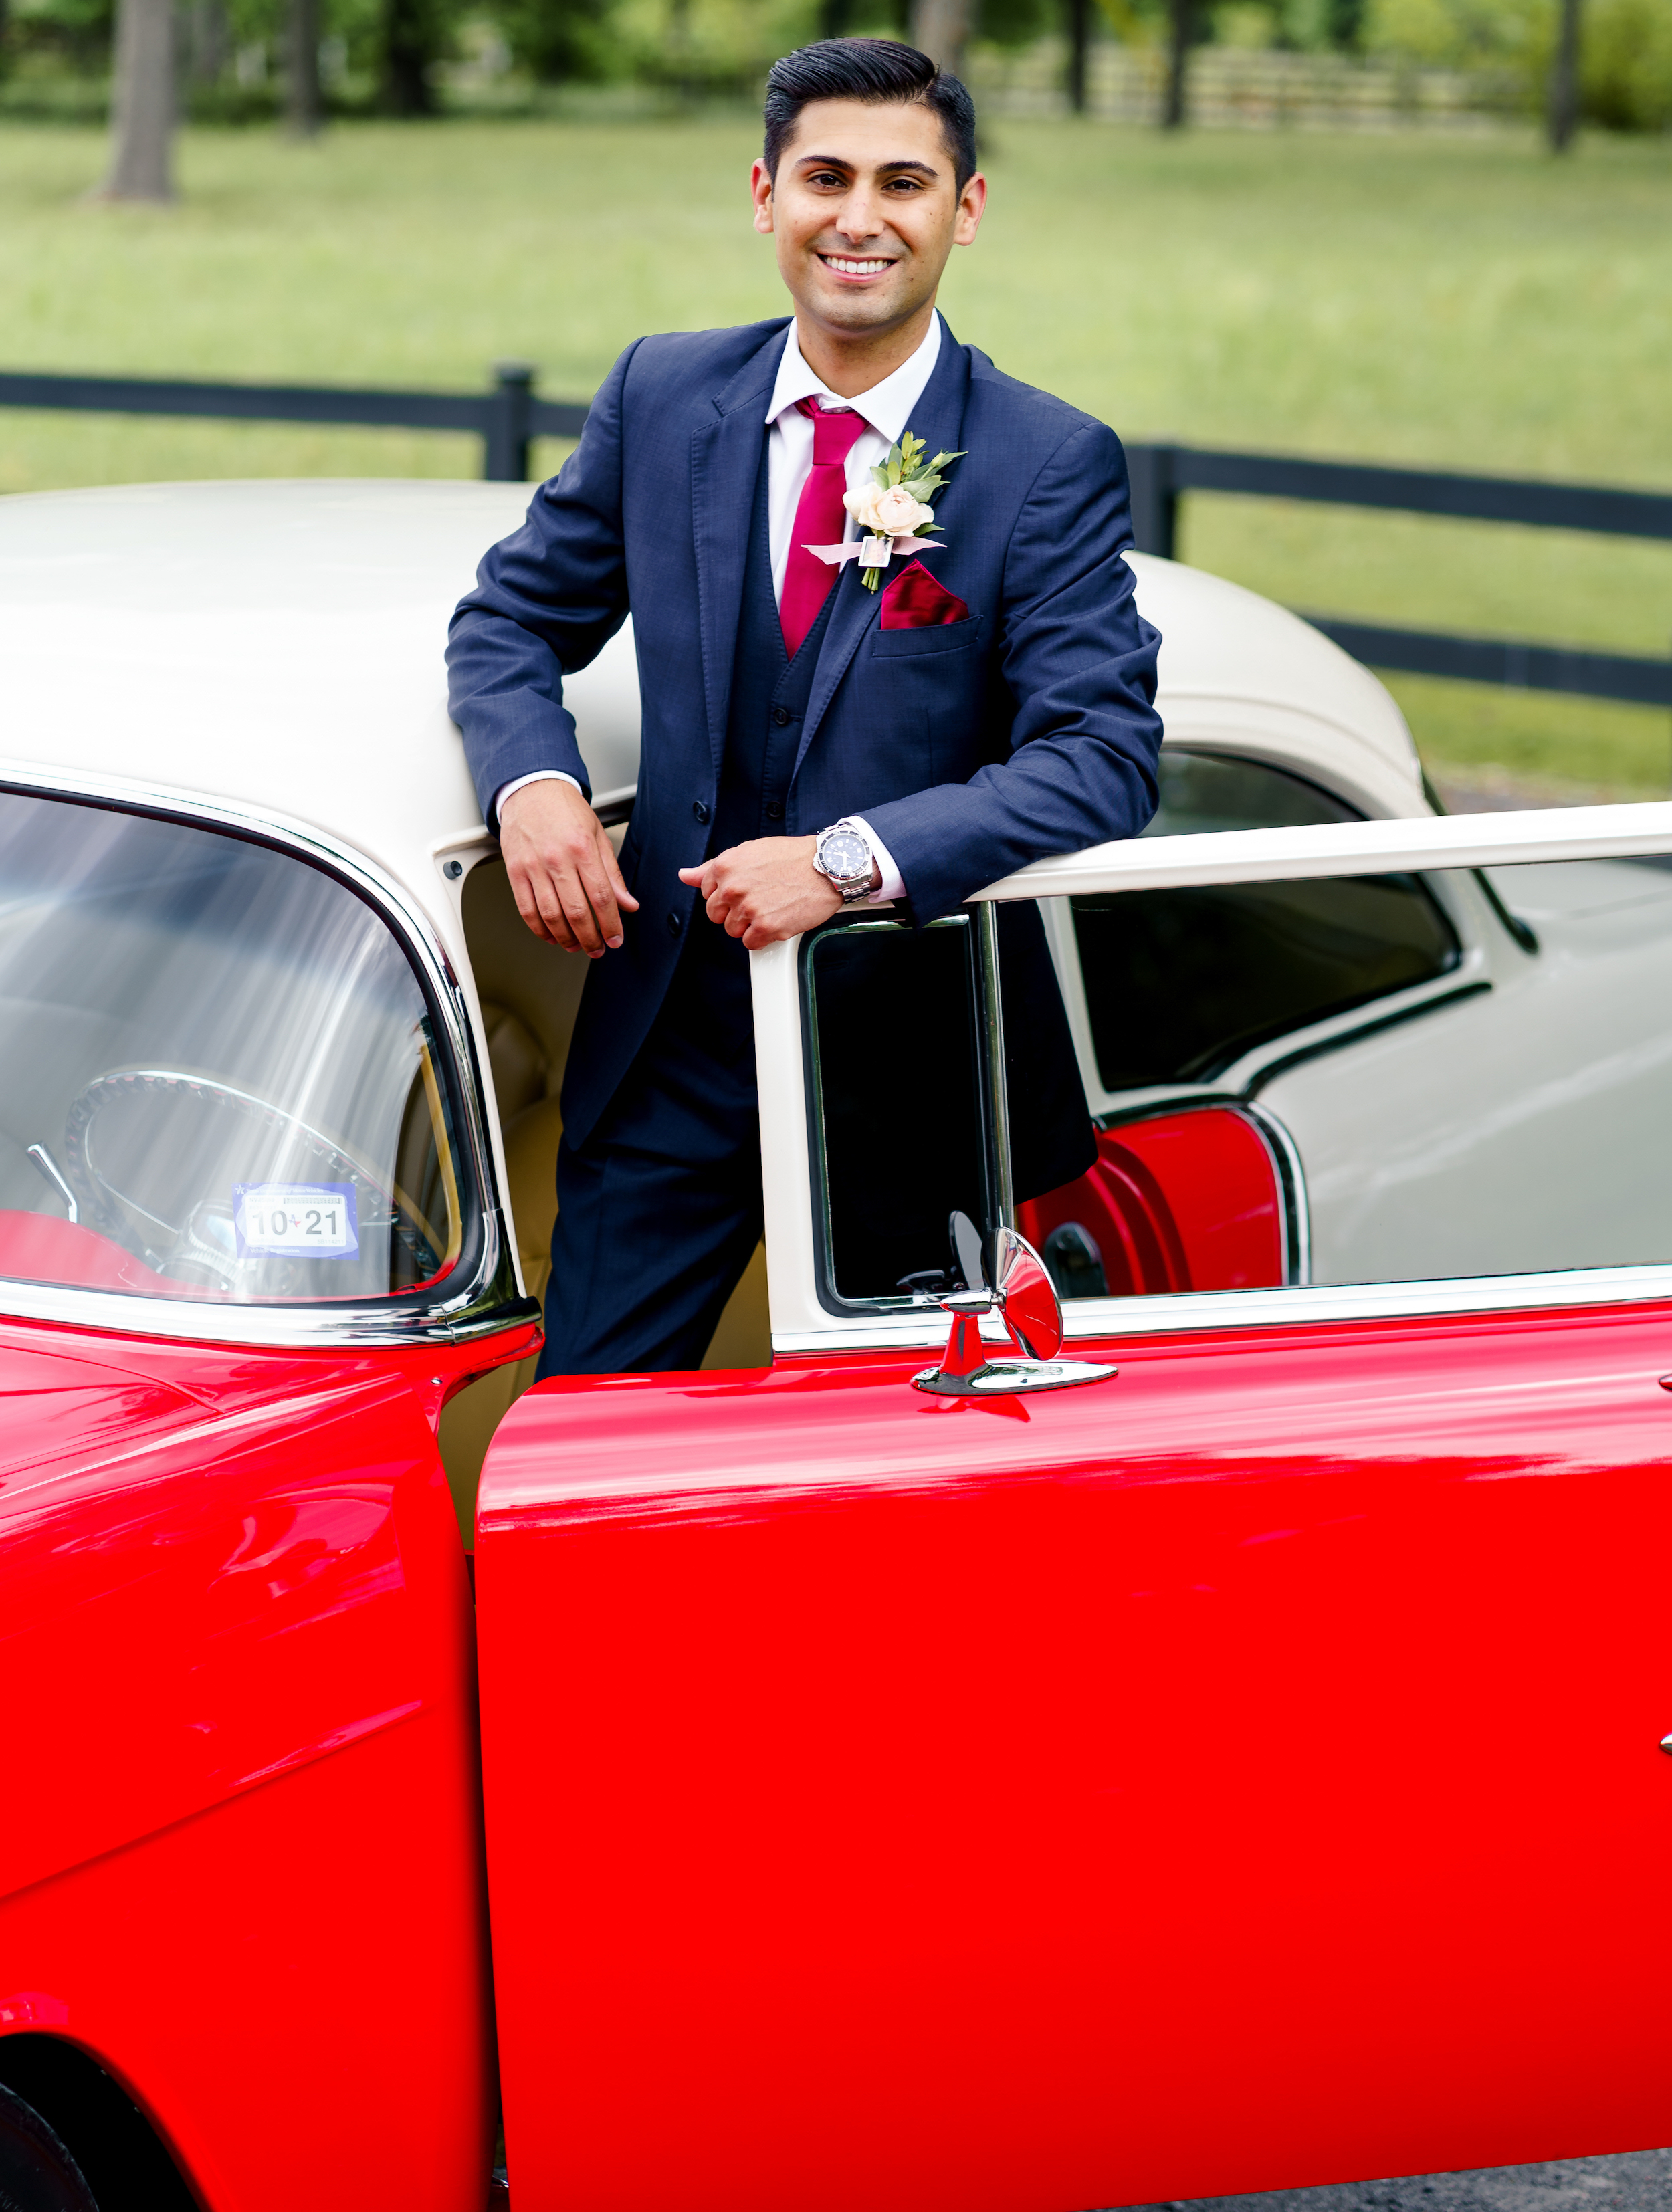 The groom is standing outside of the driver's seat of a bright red classic car parked on The Carriage House property in Montgomery, TX.